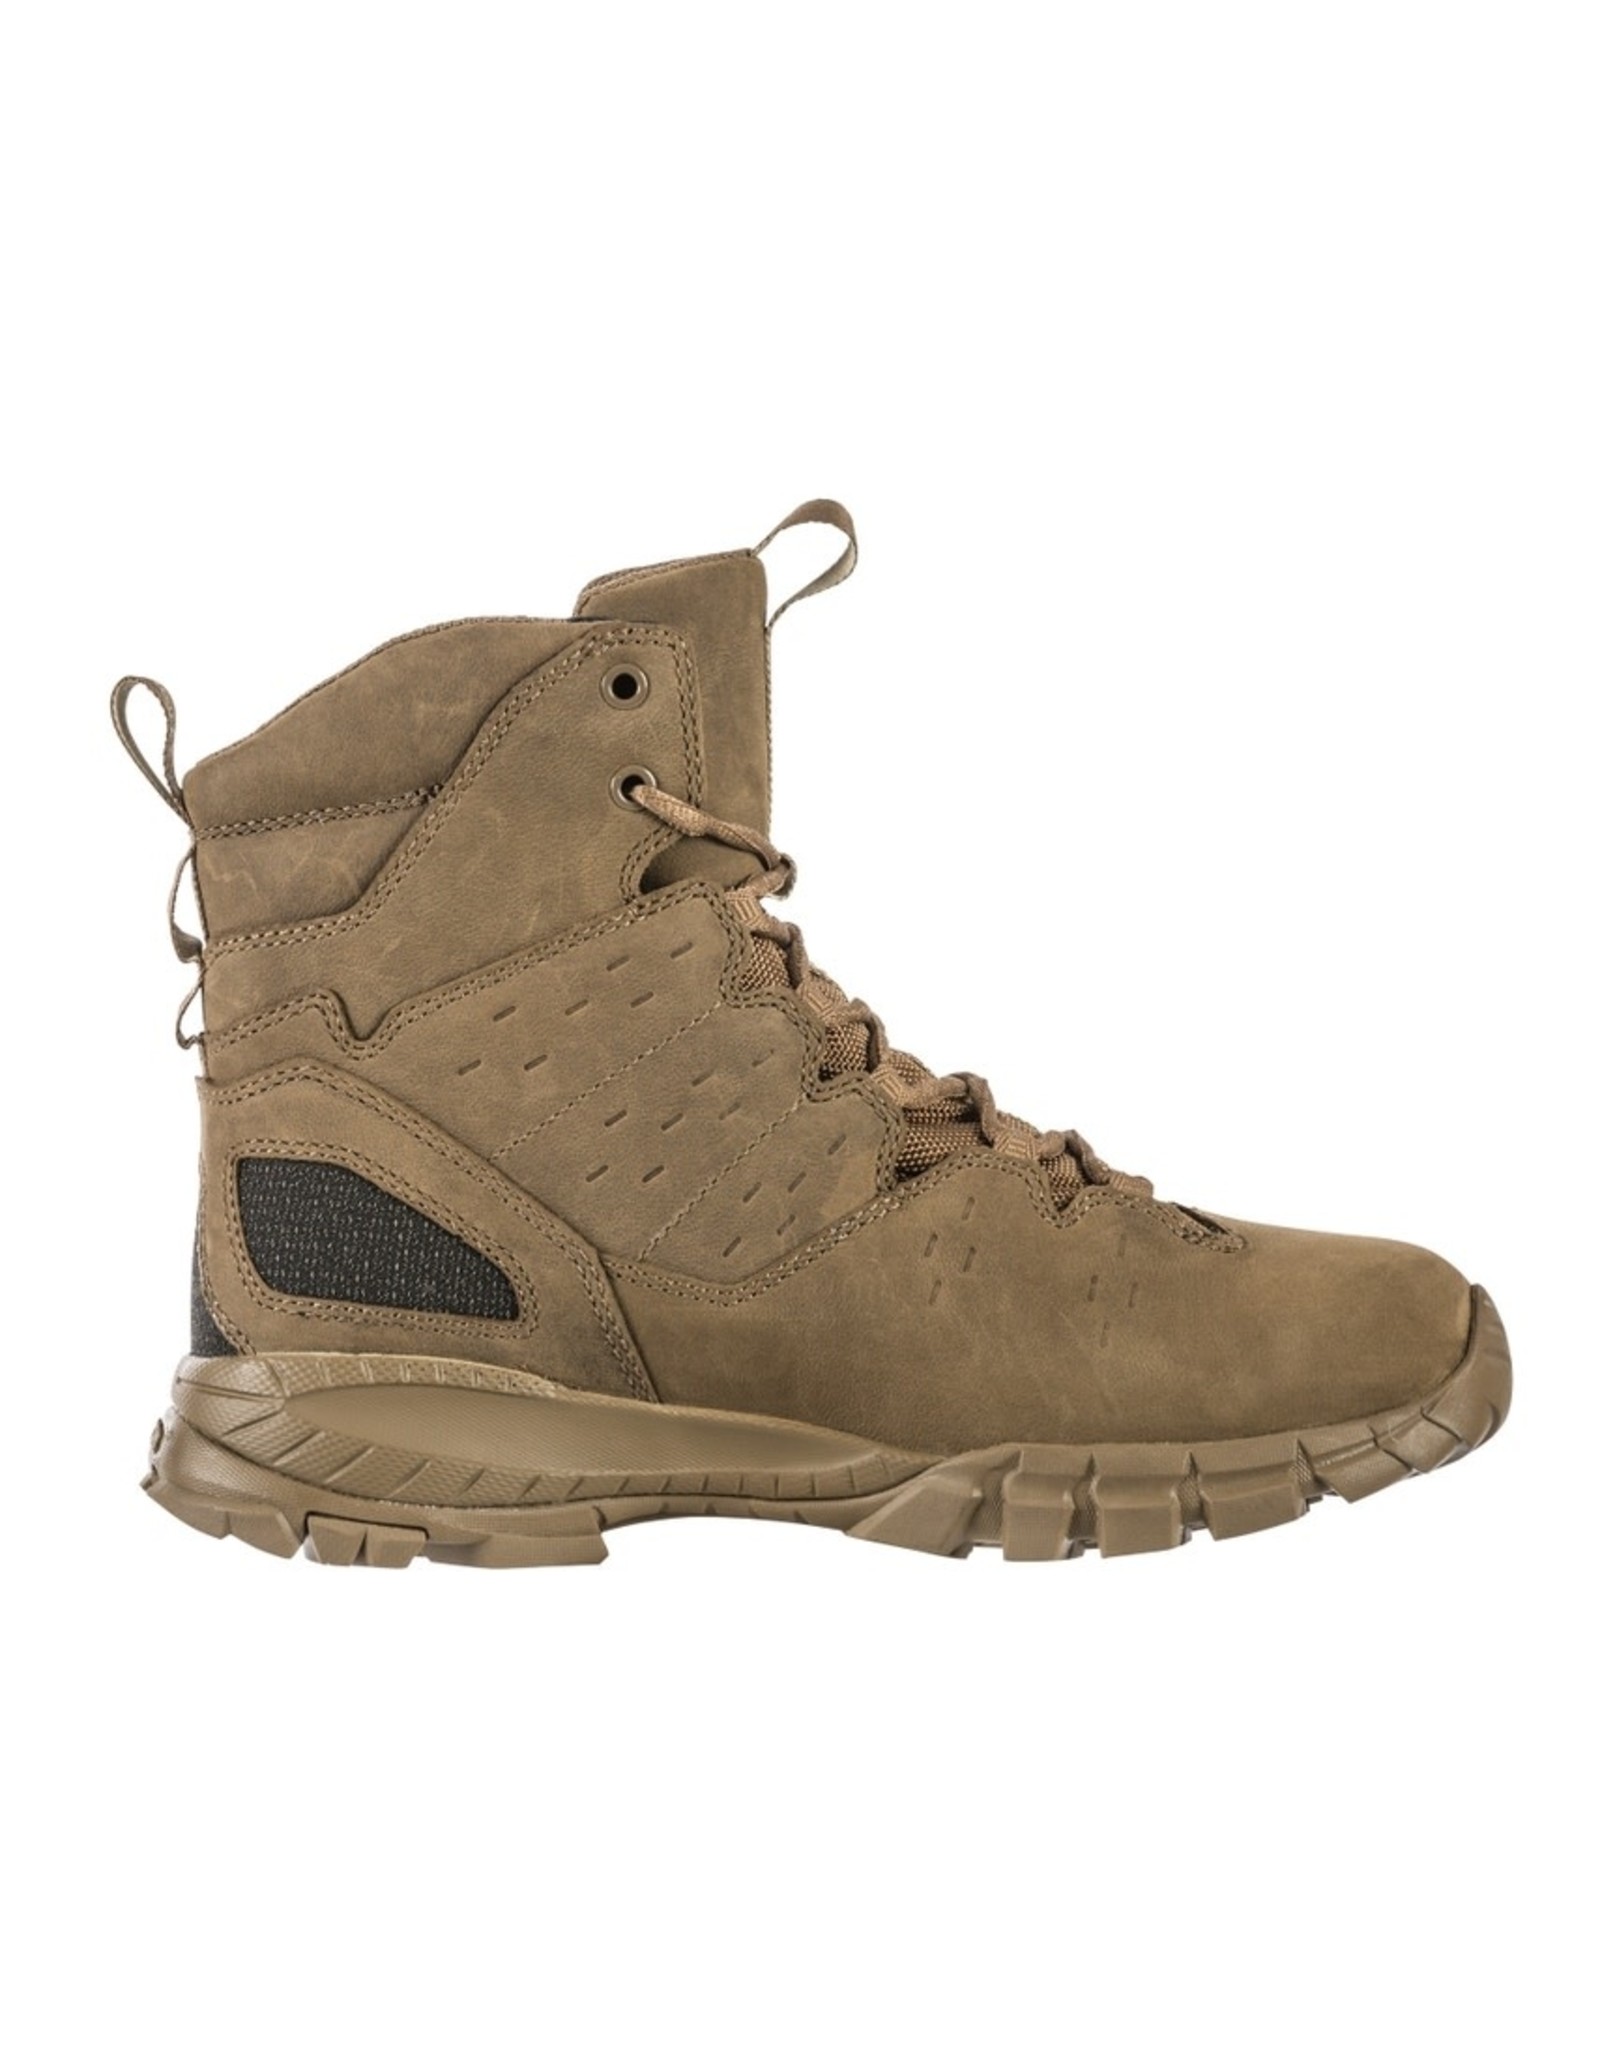 5.11 XPRT 3.0 WP 6" Boot Dark Coyote -9R